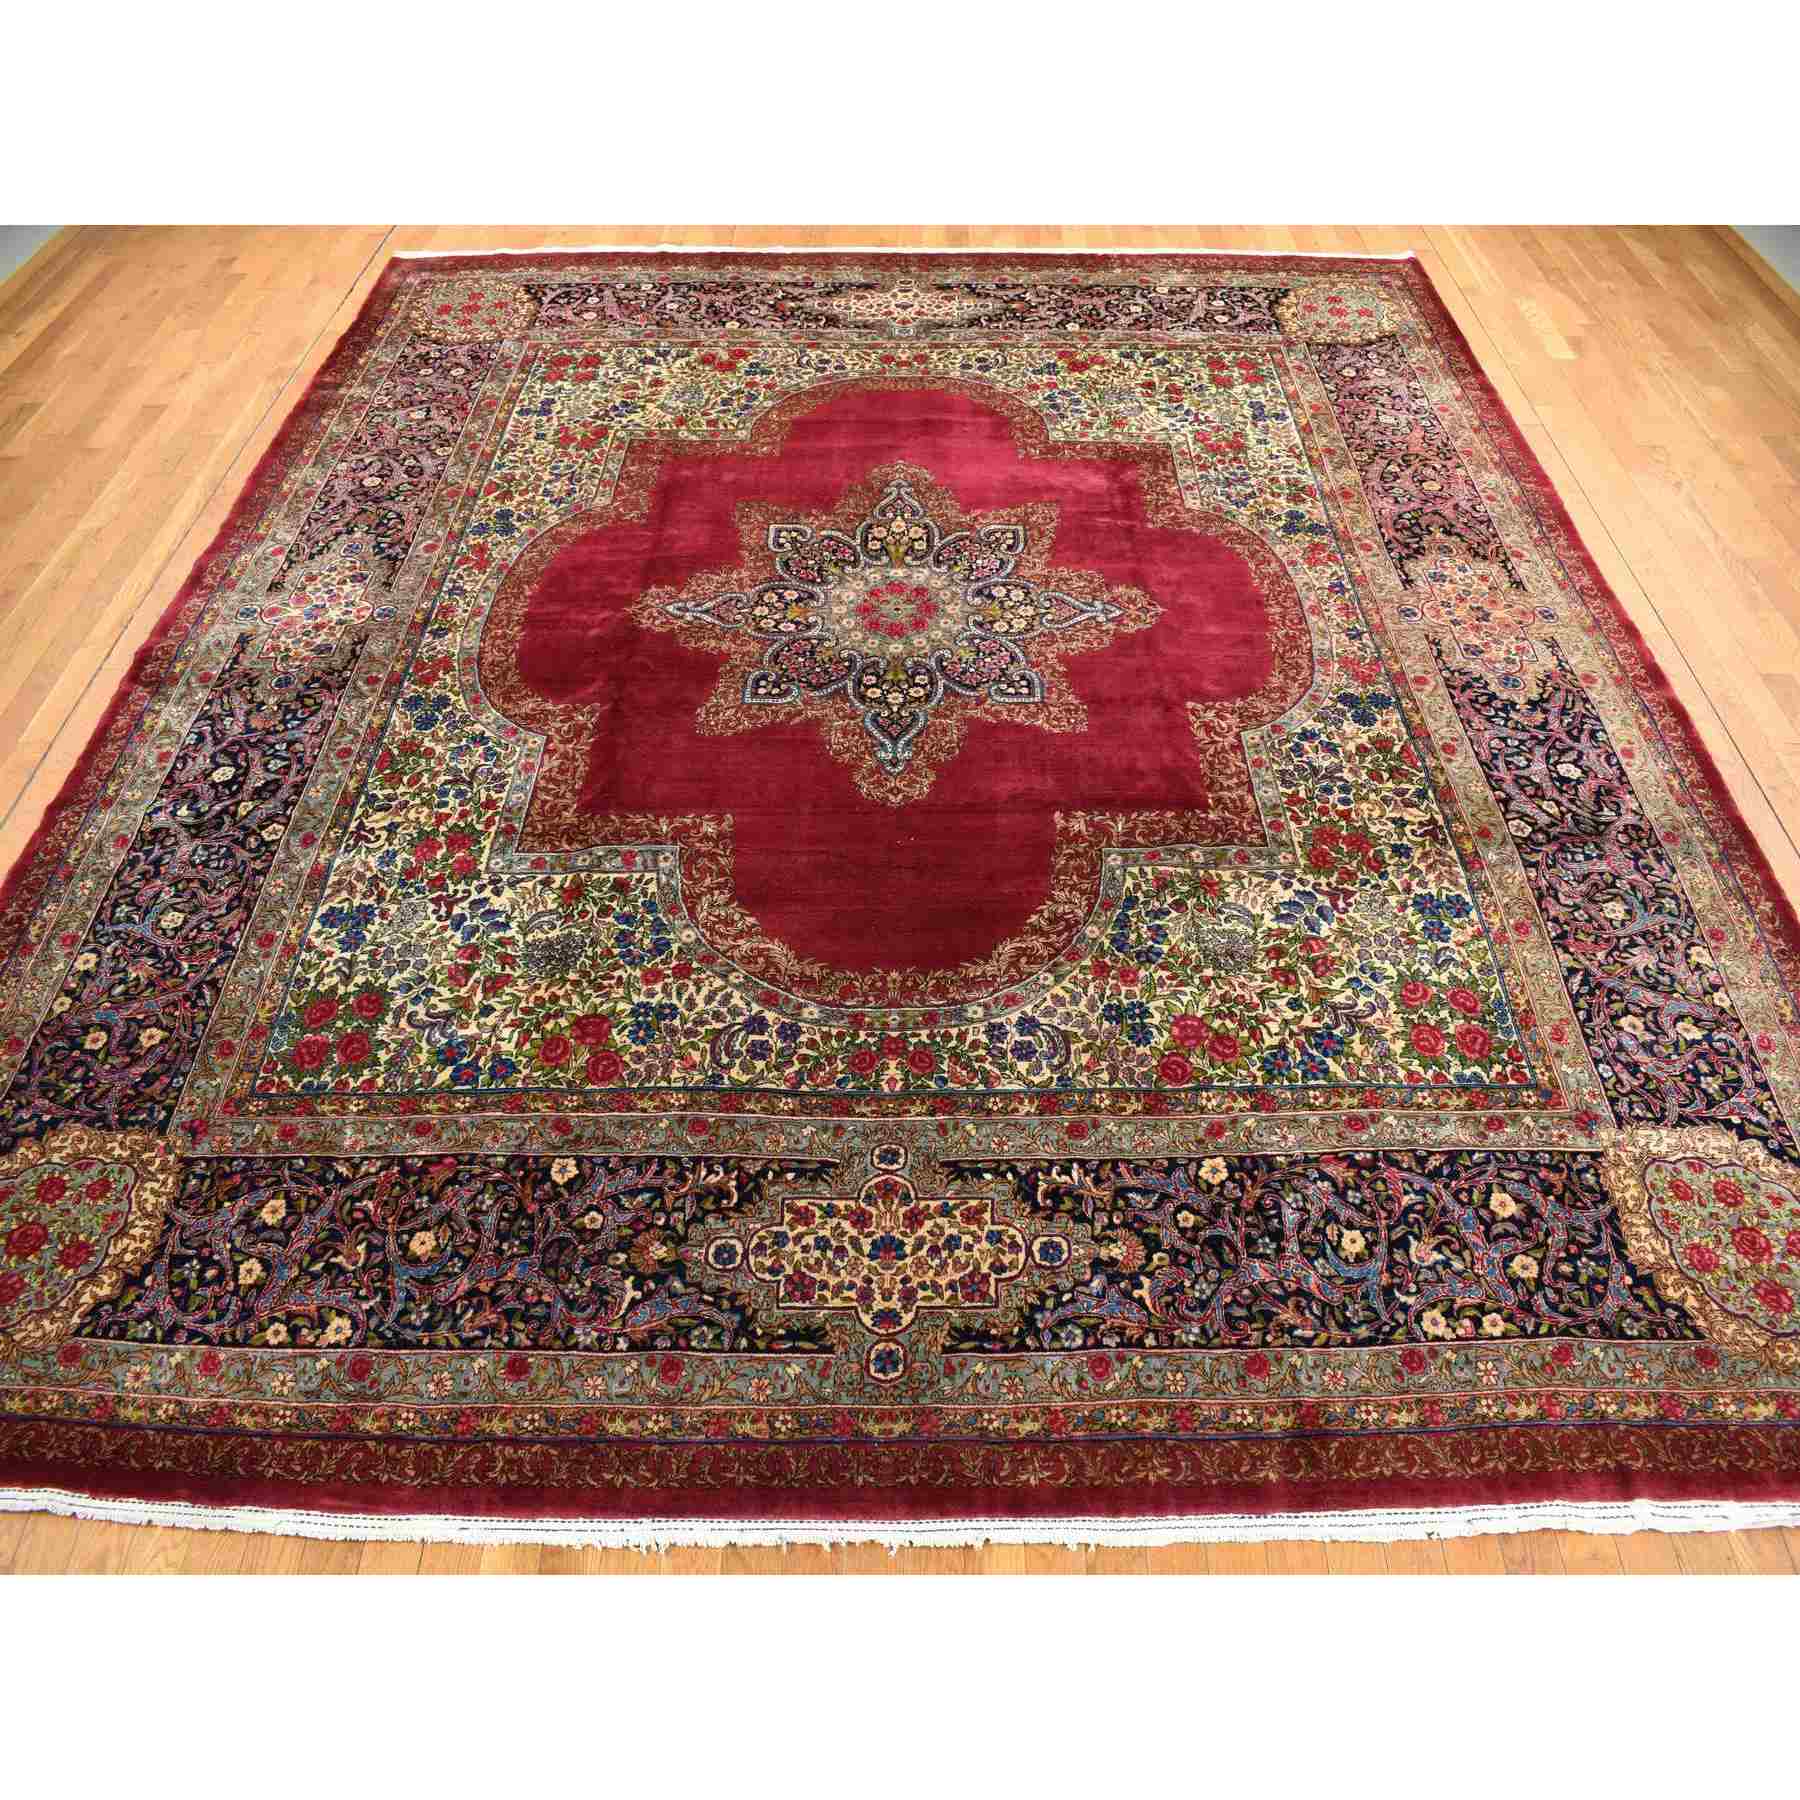 Antique-Hand-Knotted-Rug-390420